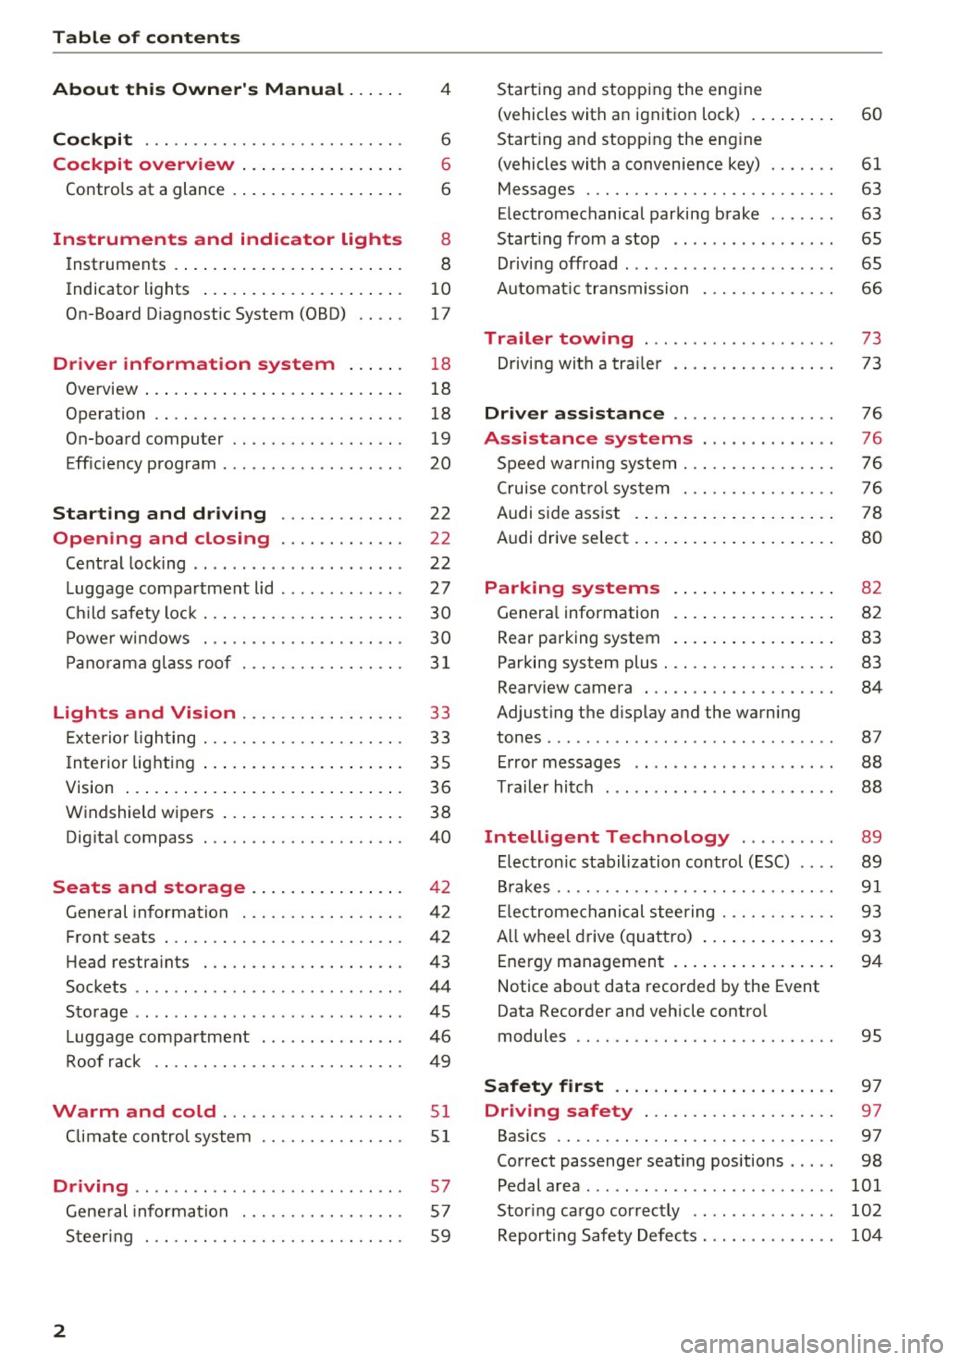 AUDI Q3 2018  Owners Manual Table  of  contents 
About  this  Owners  Manual  ... .. . 
Cockpit  ... .. ............... .... ..  . 
Cockpit  overview  ................ . 
Controls  at  a glance  ... .......... .. .. . 
Instrume